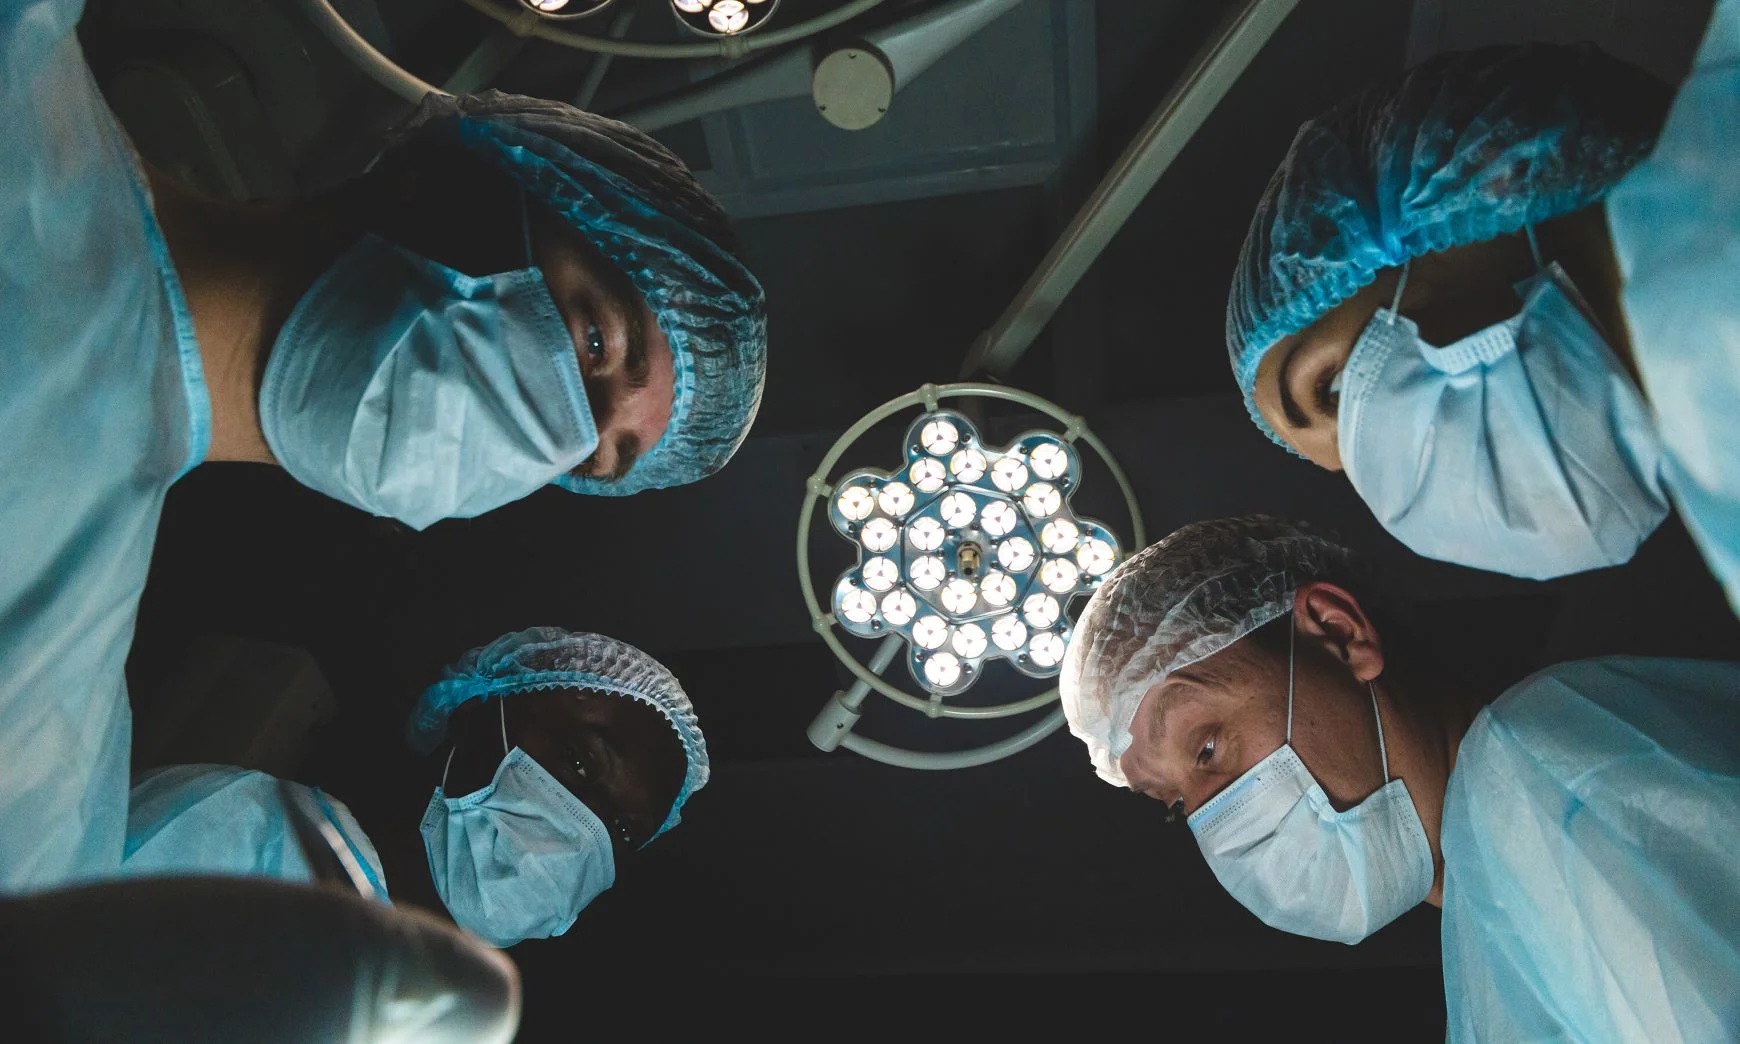 A team of doctors and nurses gathered around the viewer in an operating theater.